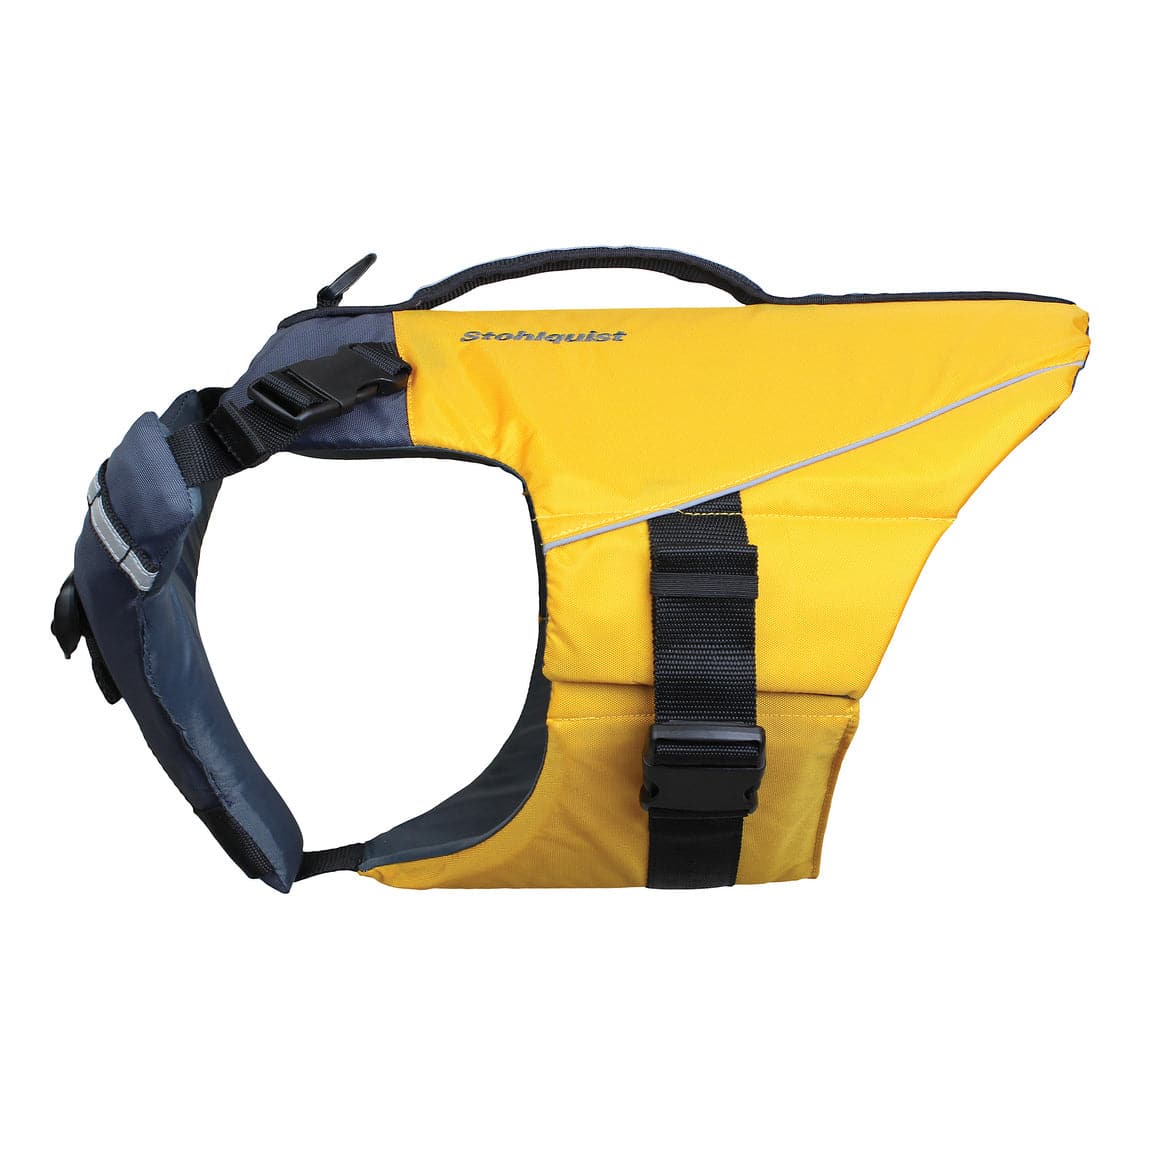 Featuring the Pup Float PFD dog pfd manufactured by Stohlquist shown here from a fourth angle.